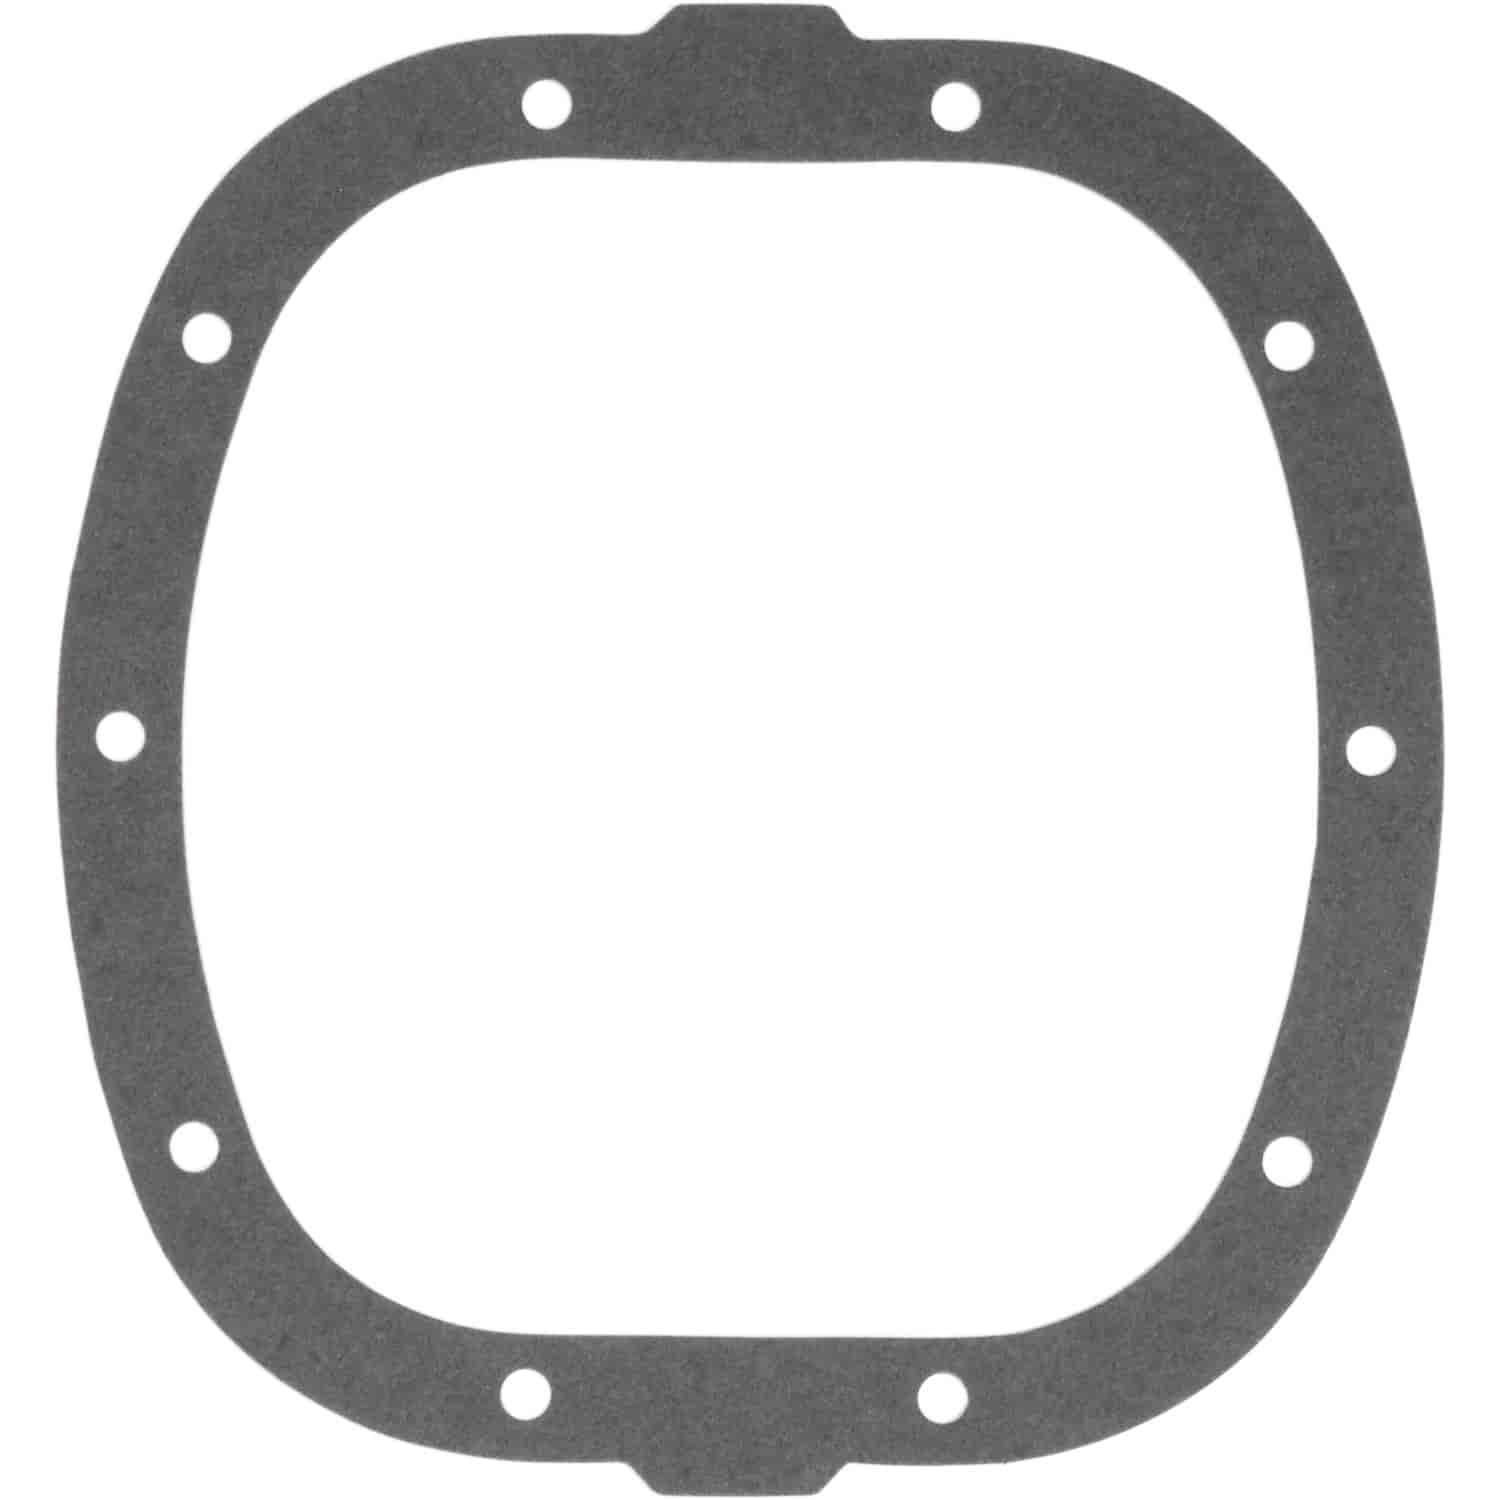 Differential Cover Gasket Chevy 10-Bolt